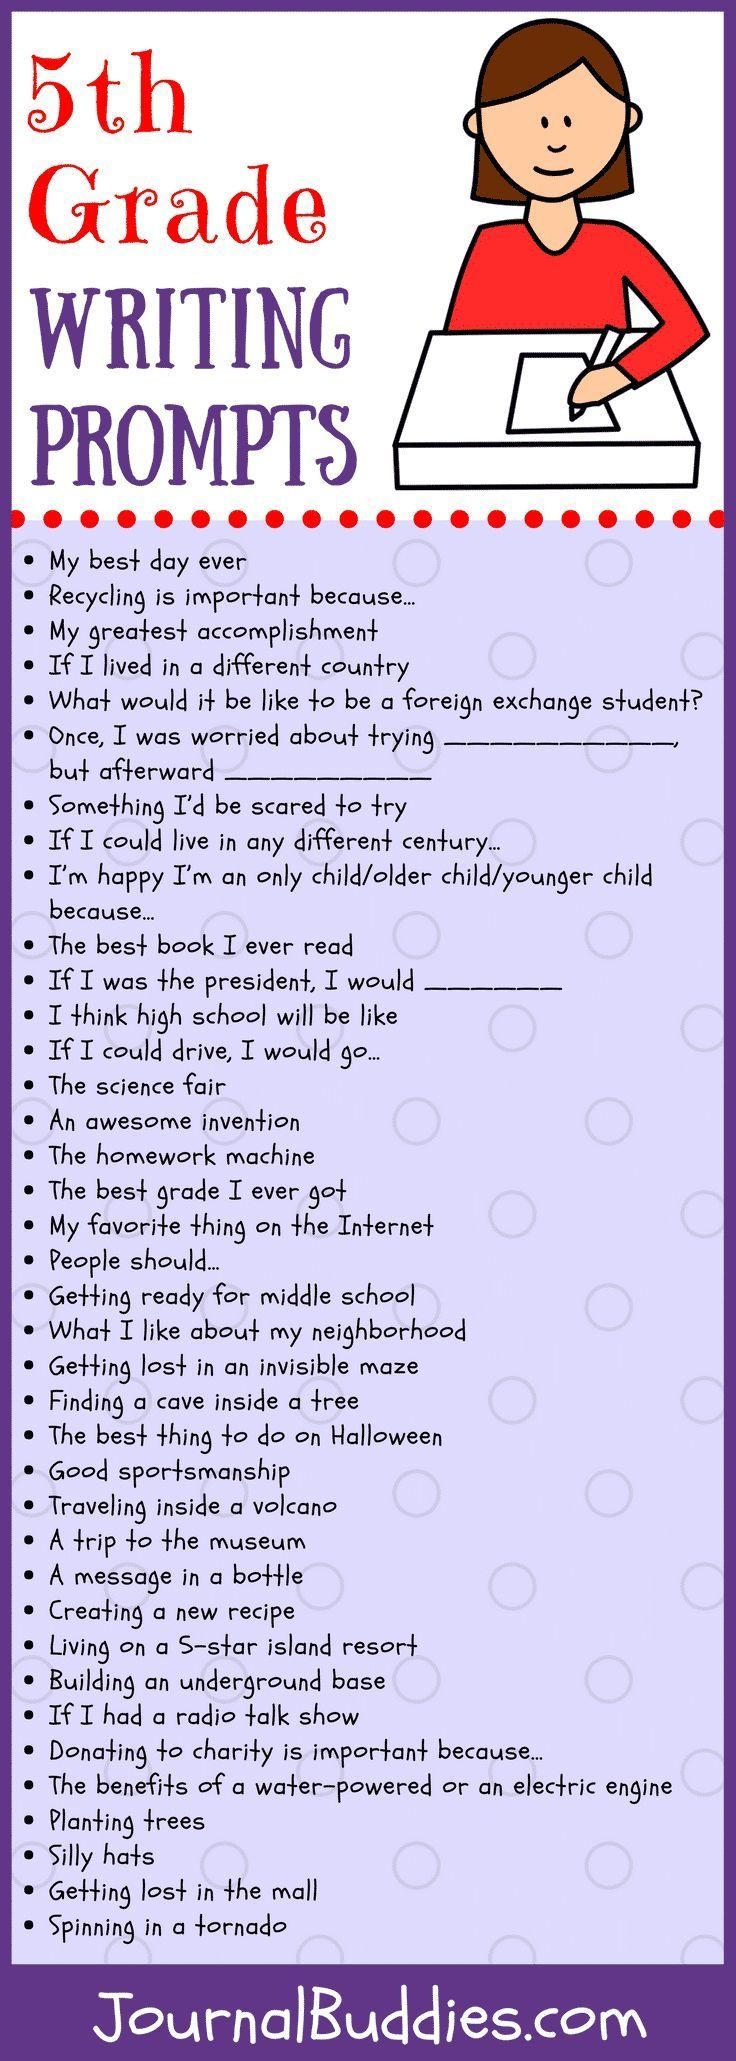 5th Grade Writing Prompts 5th Grade Writing 5th Grade Writing Prompts Homeschool Writing